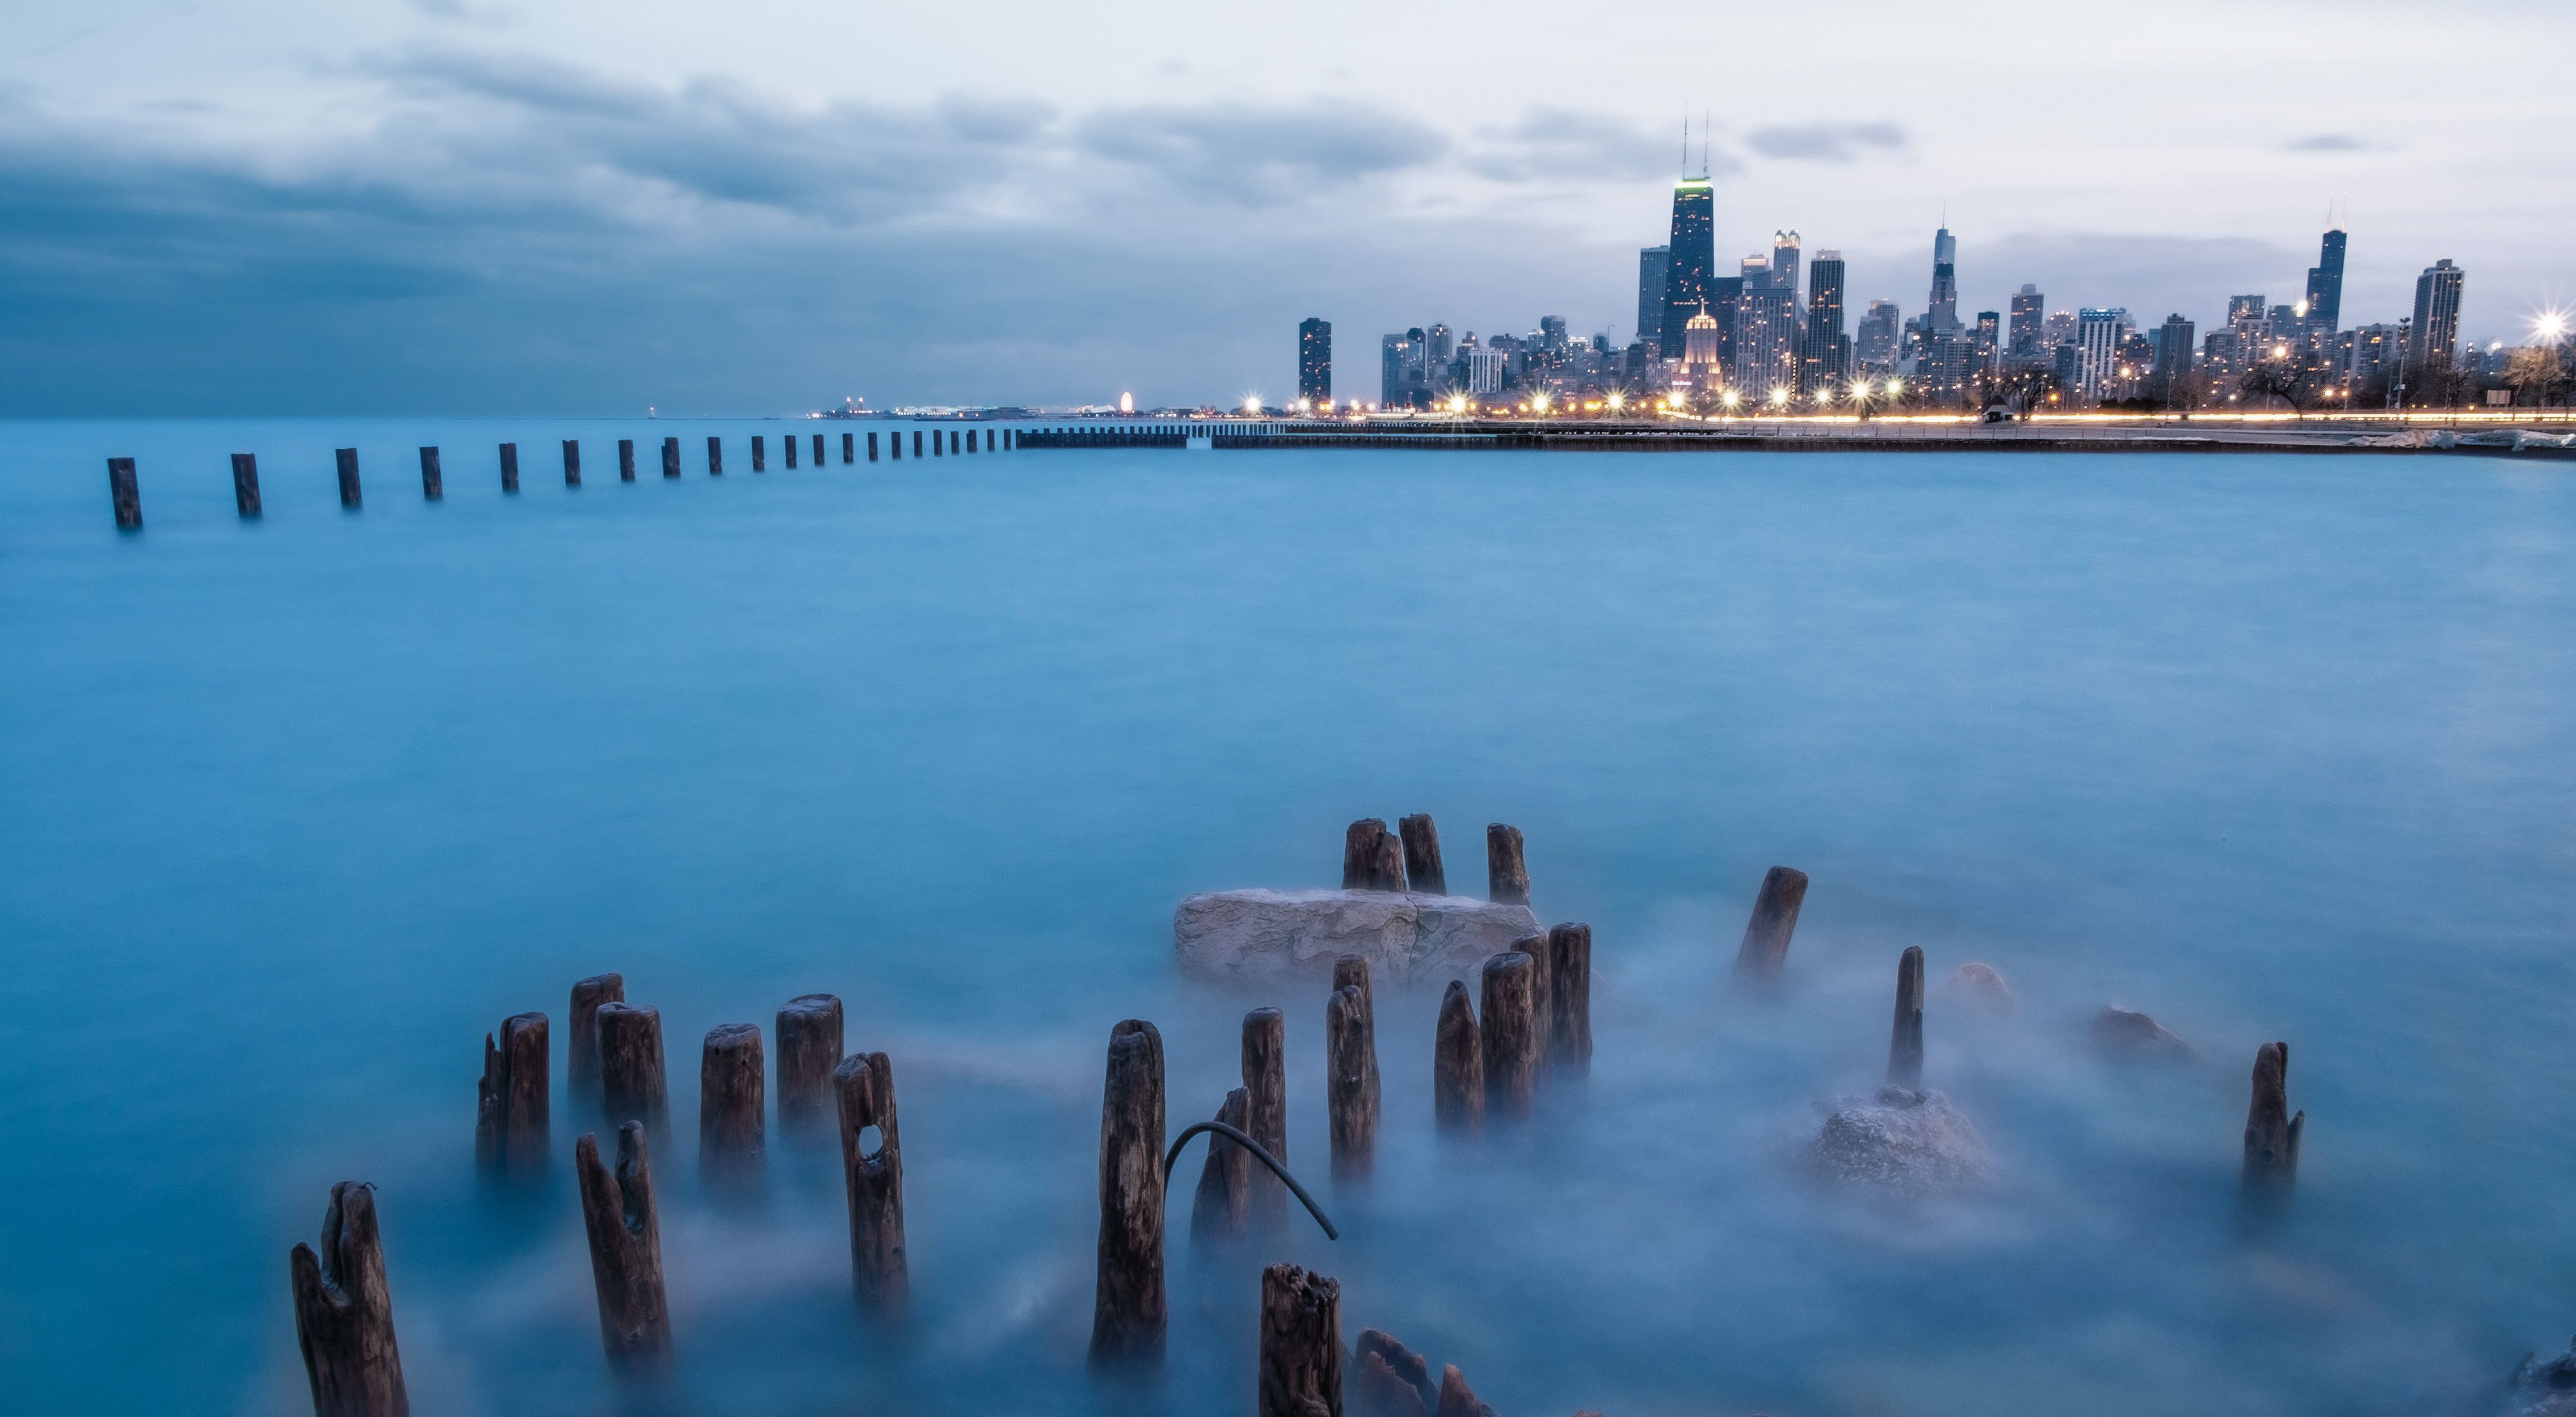 Looking over Lake Michigan to the Chicago skyline